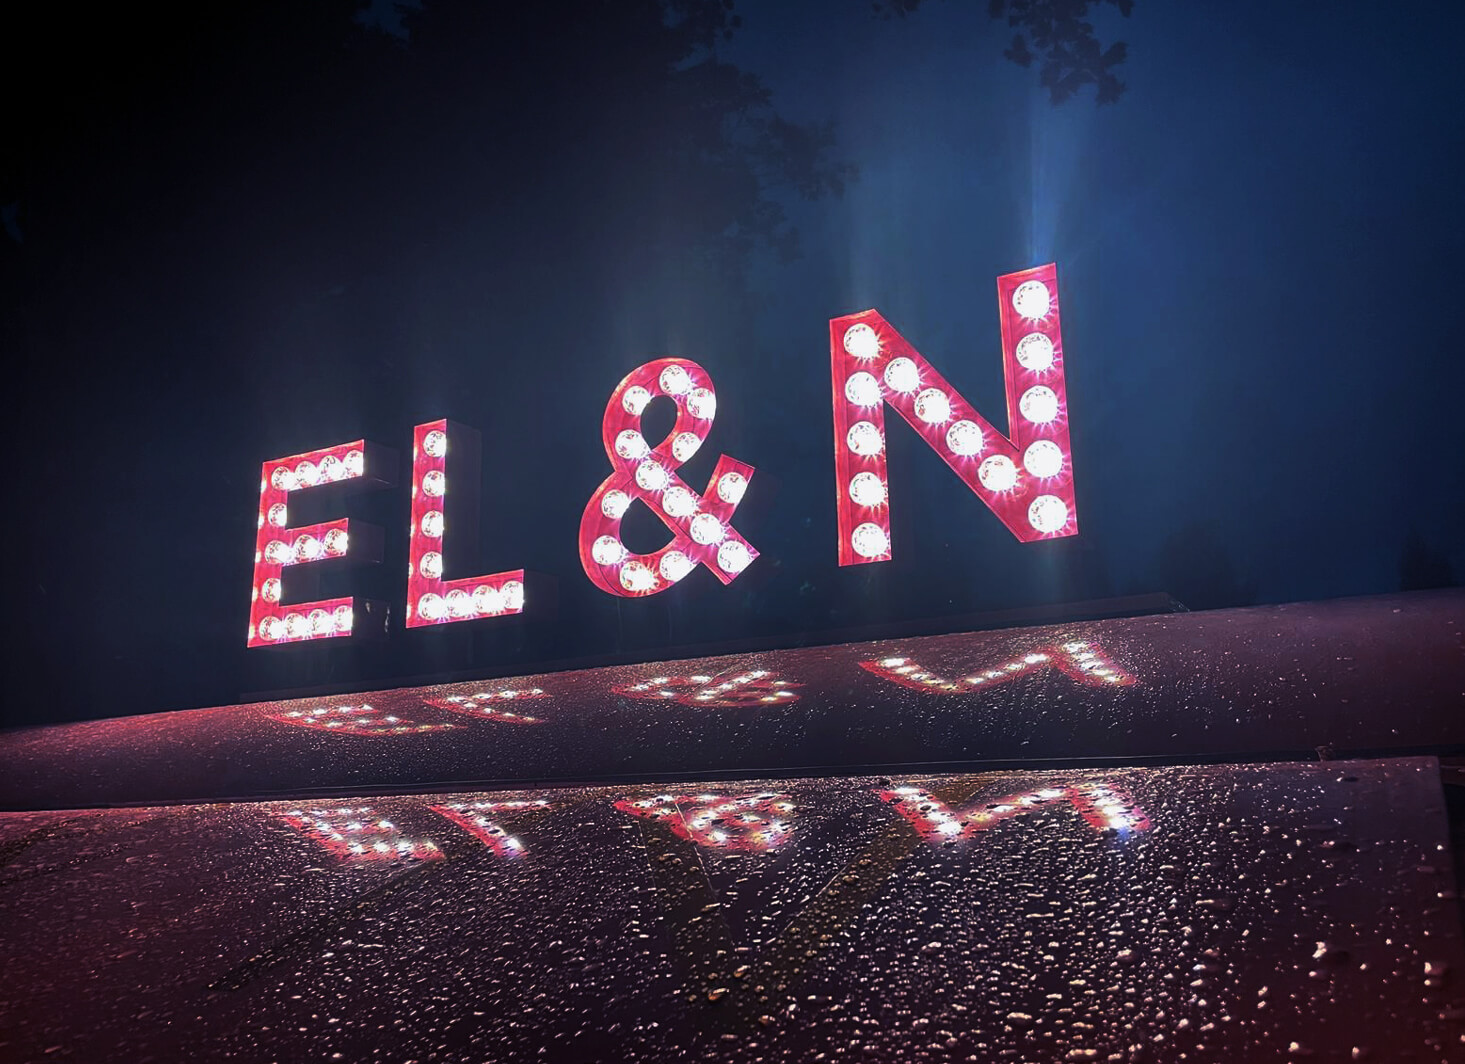 EL - Letters with light bulbs